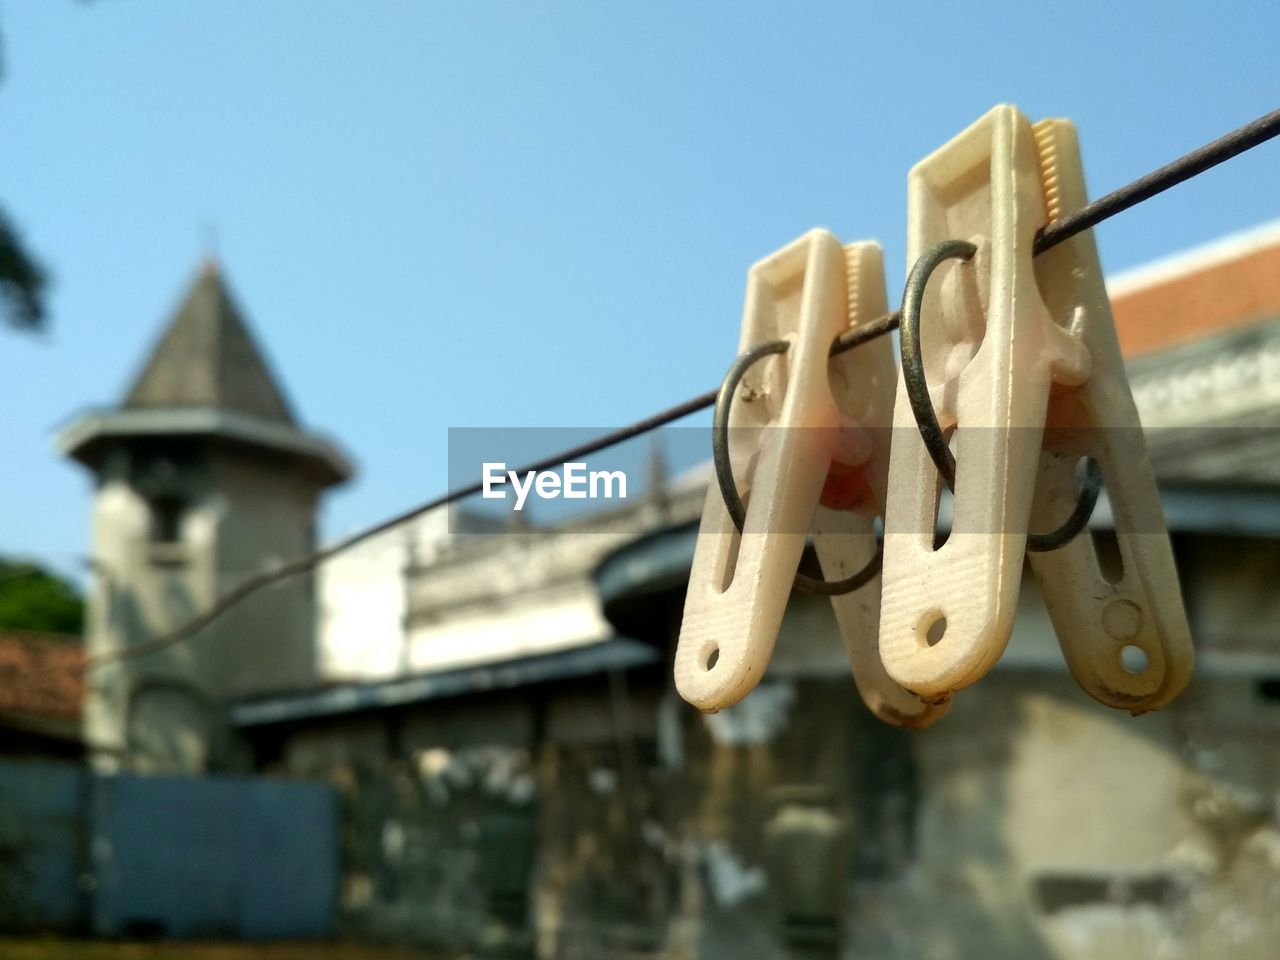 Low angle view of clothespins hanging on rope against buildings and sky